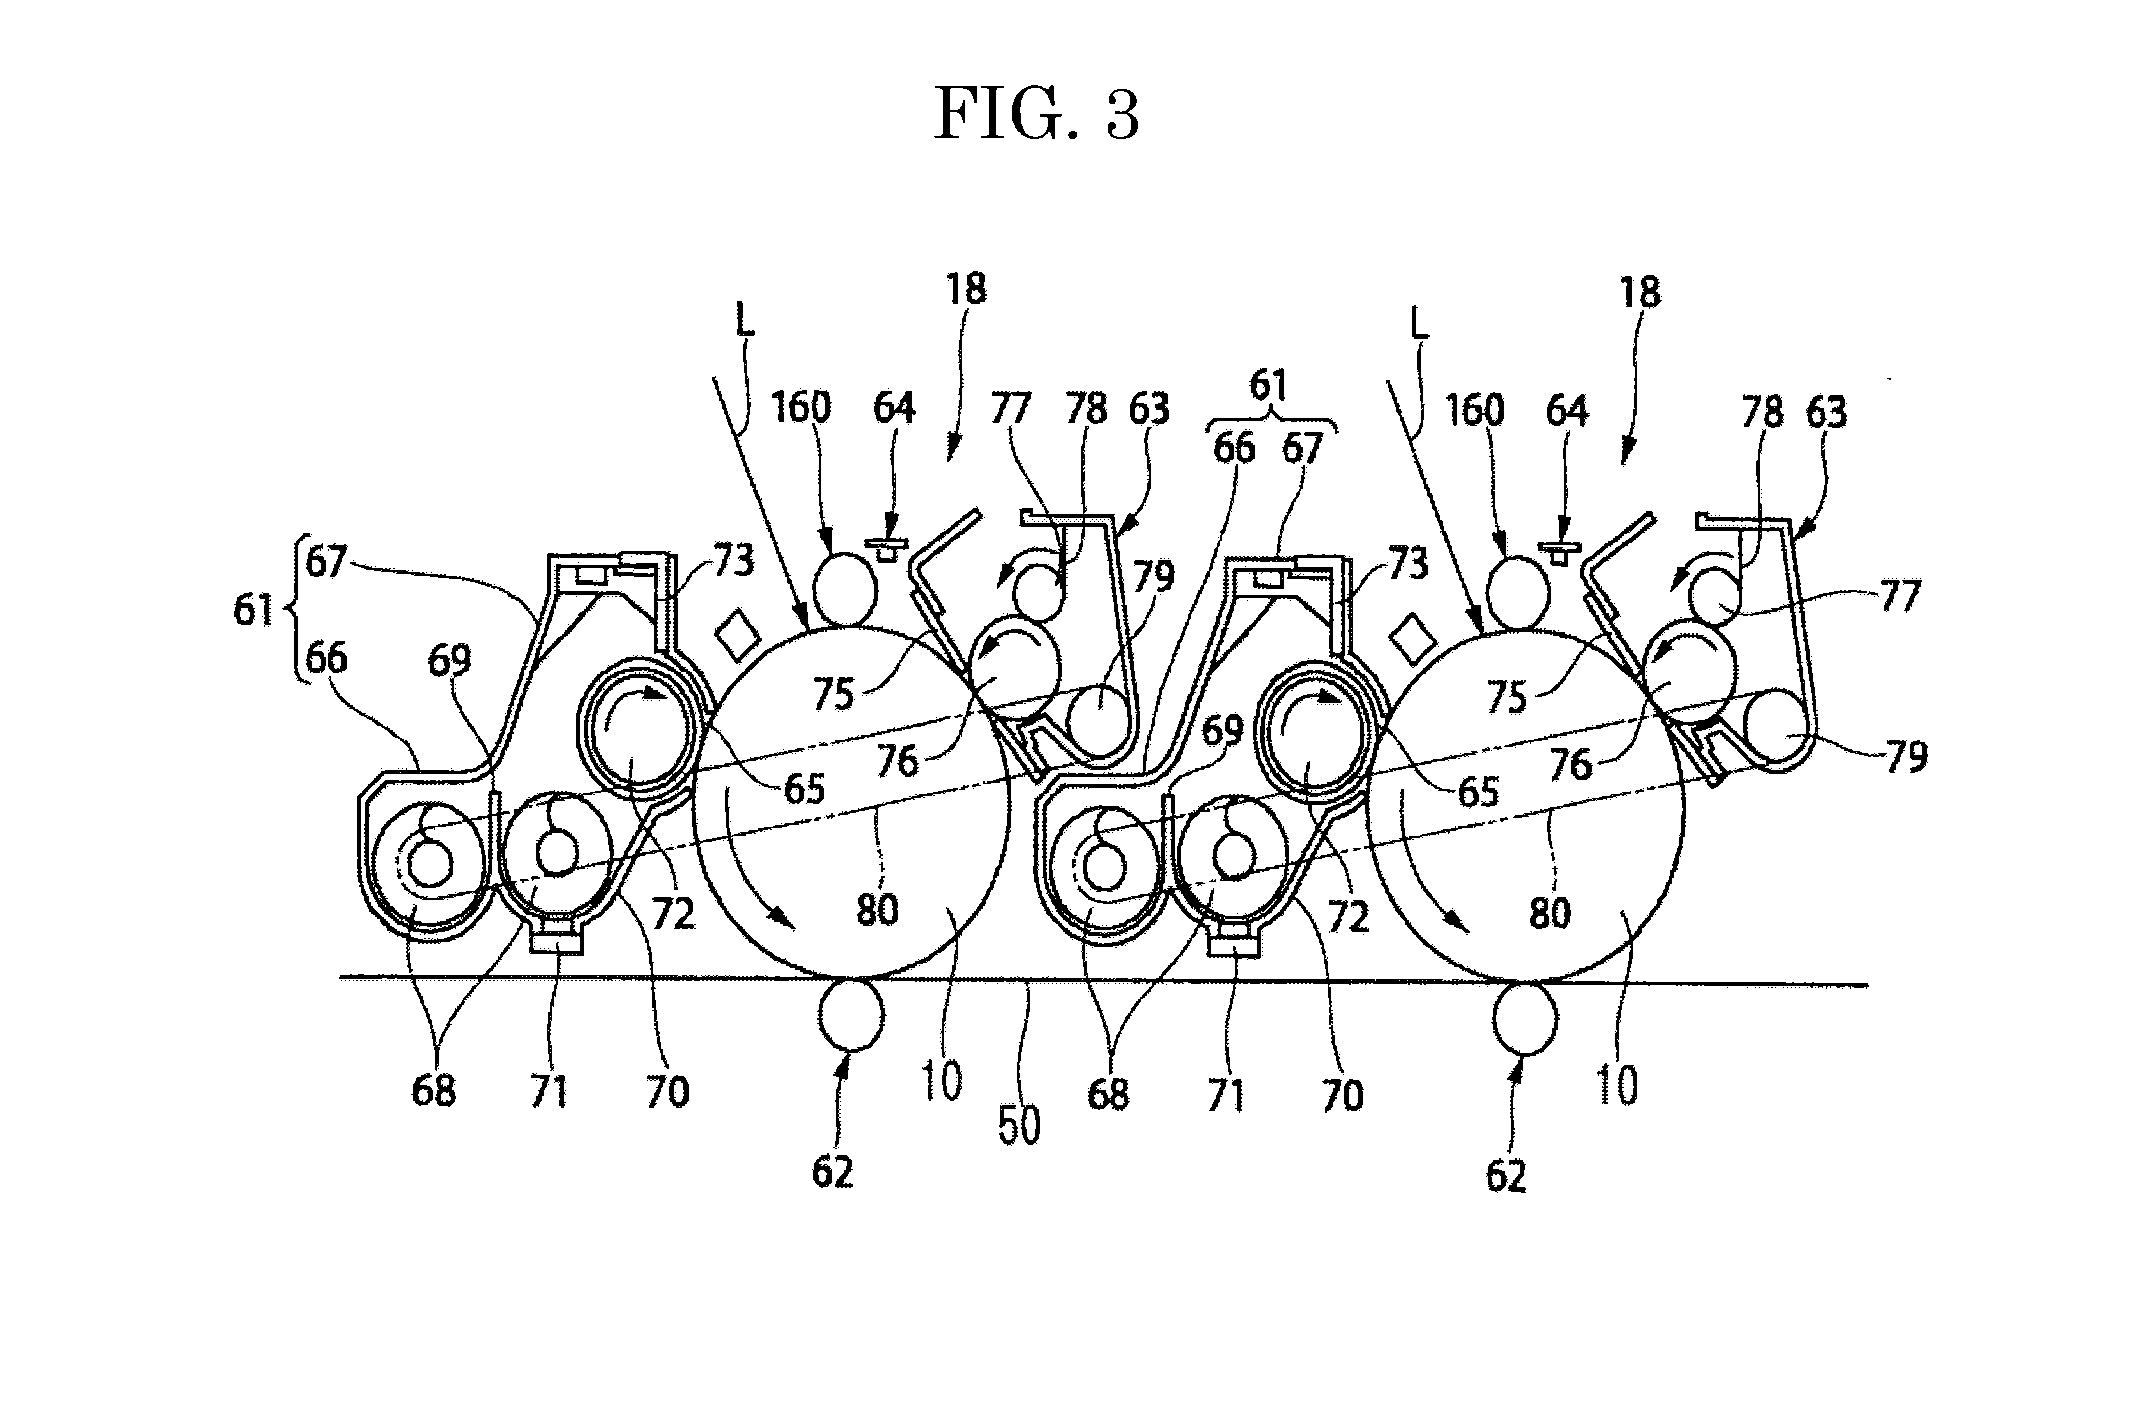 Toner for forming electrostatic image, developer, process cartridge, and image forming apparatus